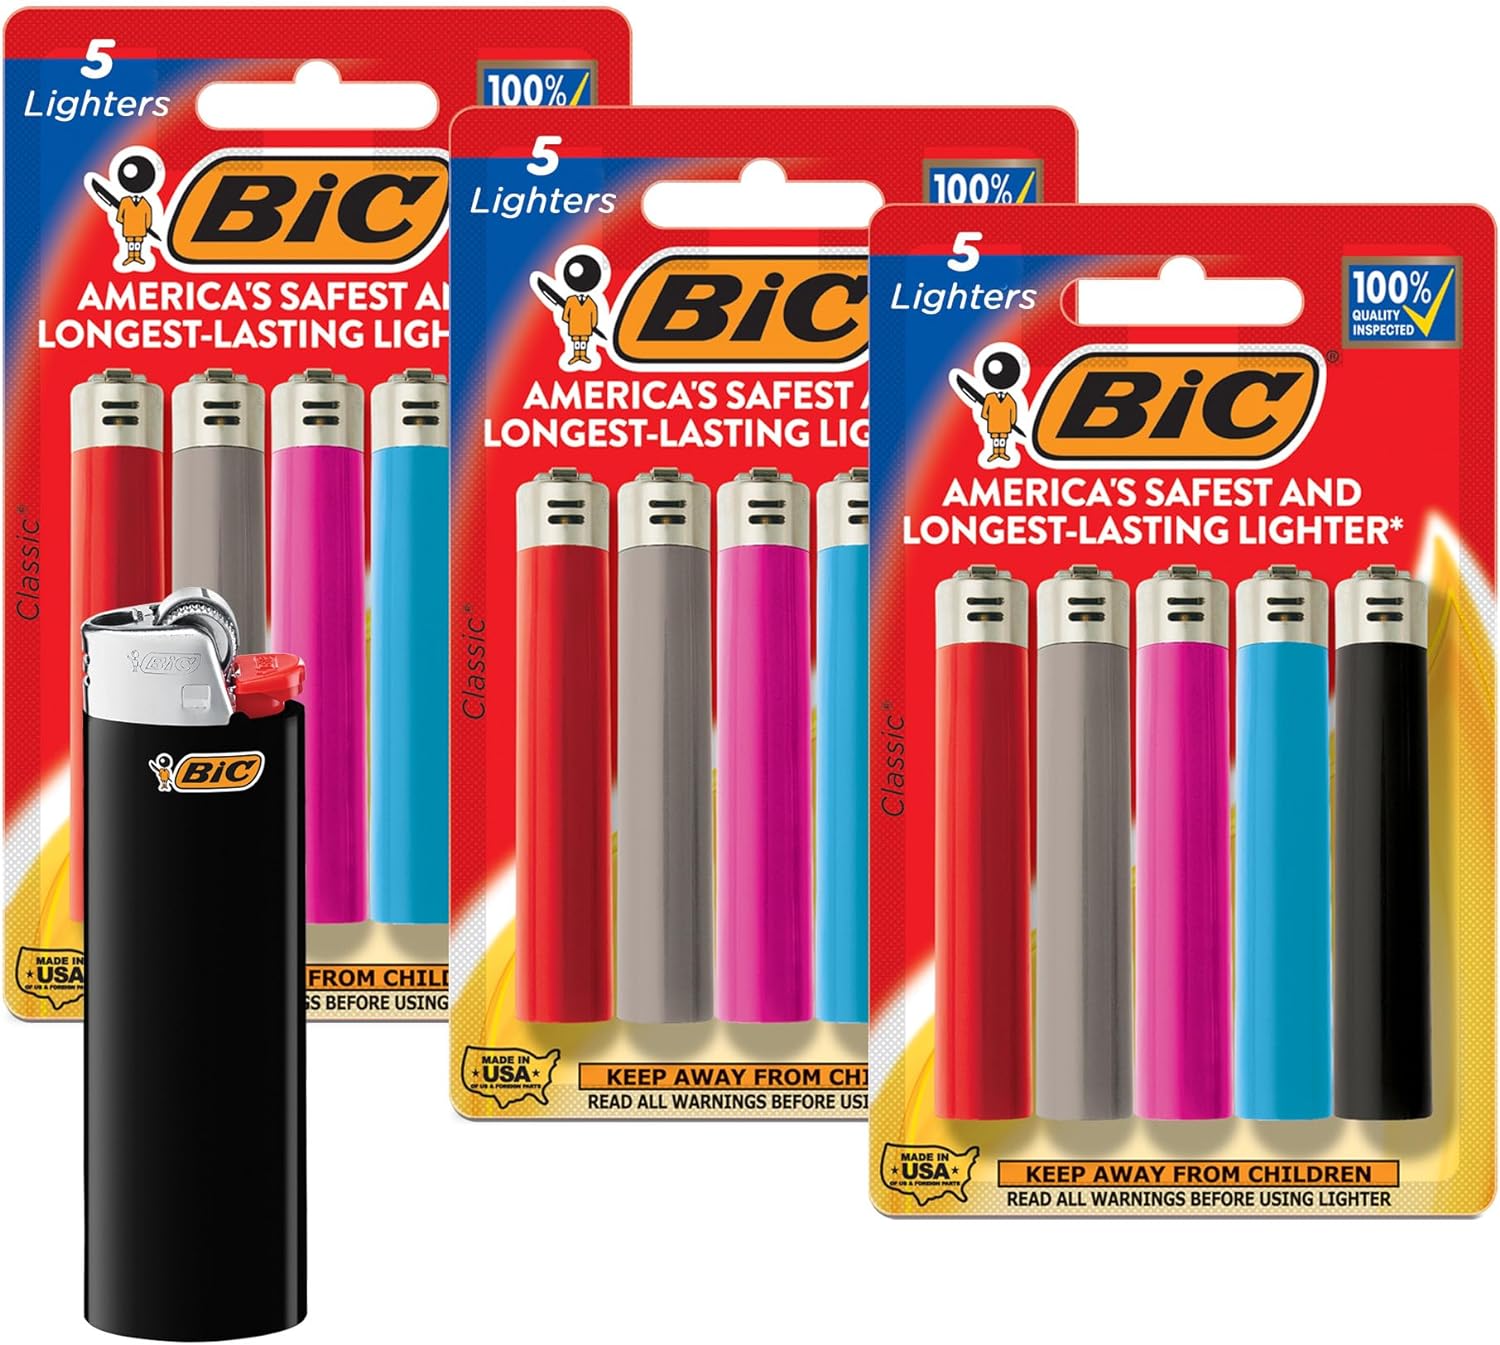 Bic lighters are always high quality and last a while. They came exactly as ordered, correct number of packages and lighters in each package. I'd recommend this if you often lose your lighters around the house or happen to use lighters fairly often. I hope this helps any who are thinking of buying, it' worth your money :)